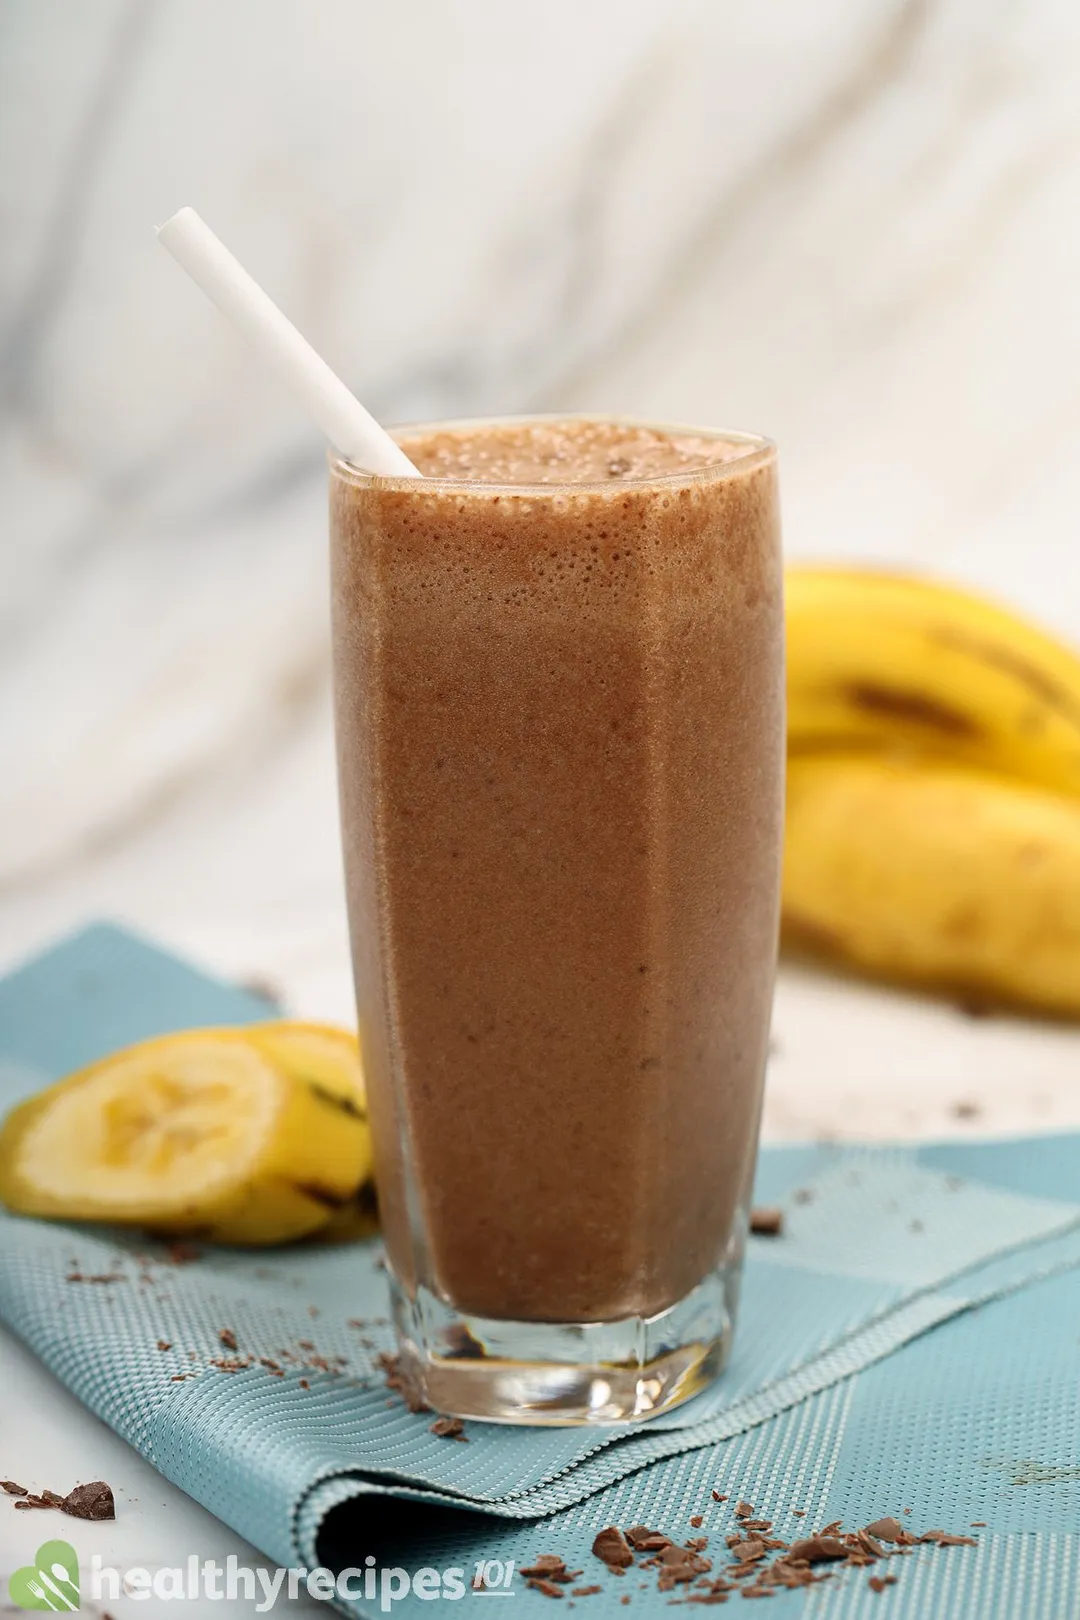 A tall glass of choolate banana smoothie placed on a blue cloth with unpeeled yellow bananas in the back.